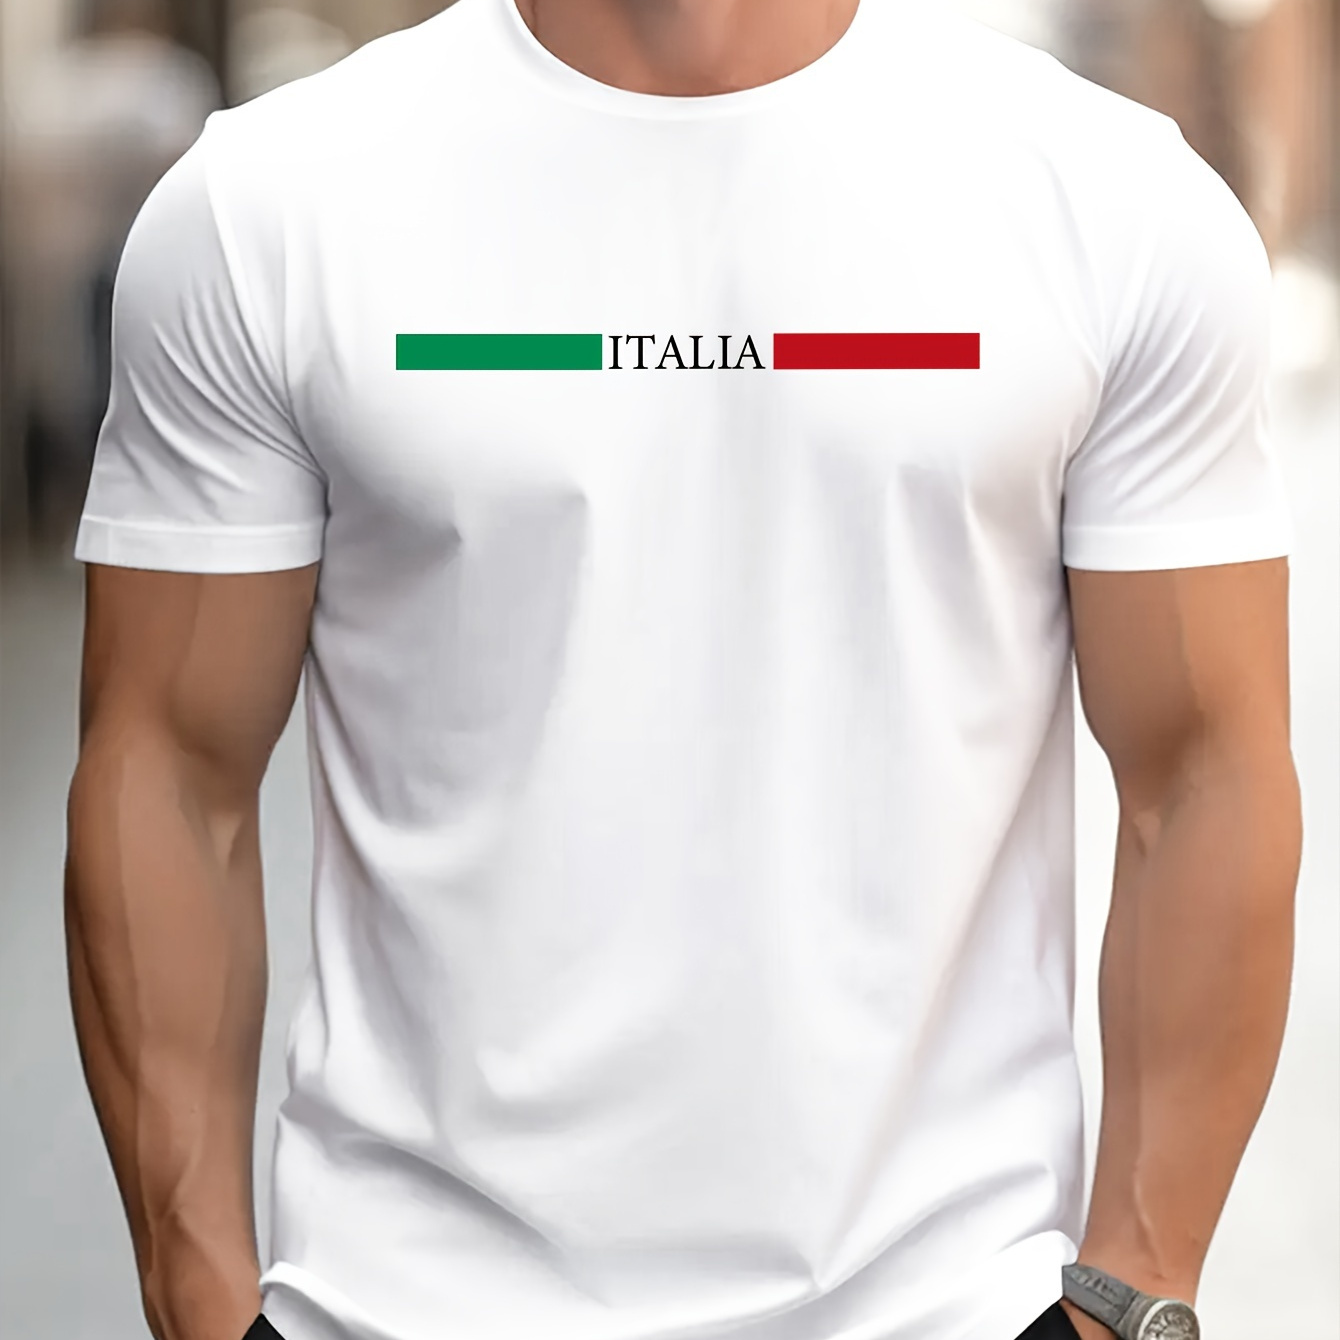 

Men's Casual Crew Neck Graphic T-shirt With Stylish "italia" Print, Trendy Printed Short Sleeve Top For Summer Daily Wear